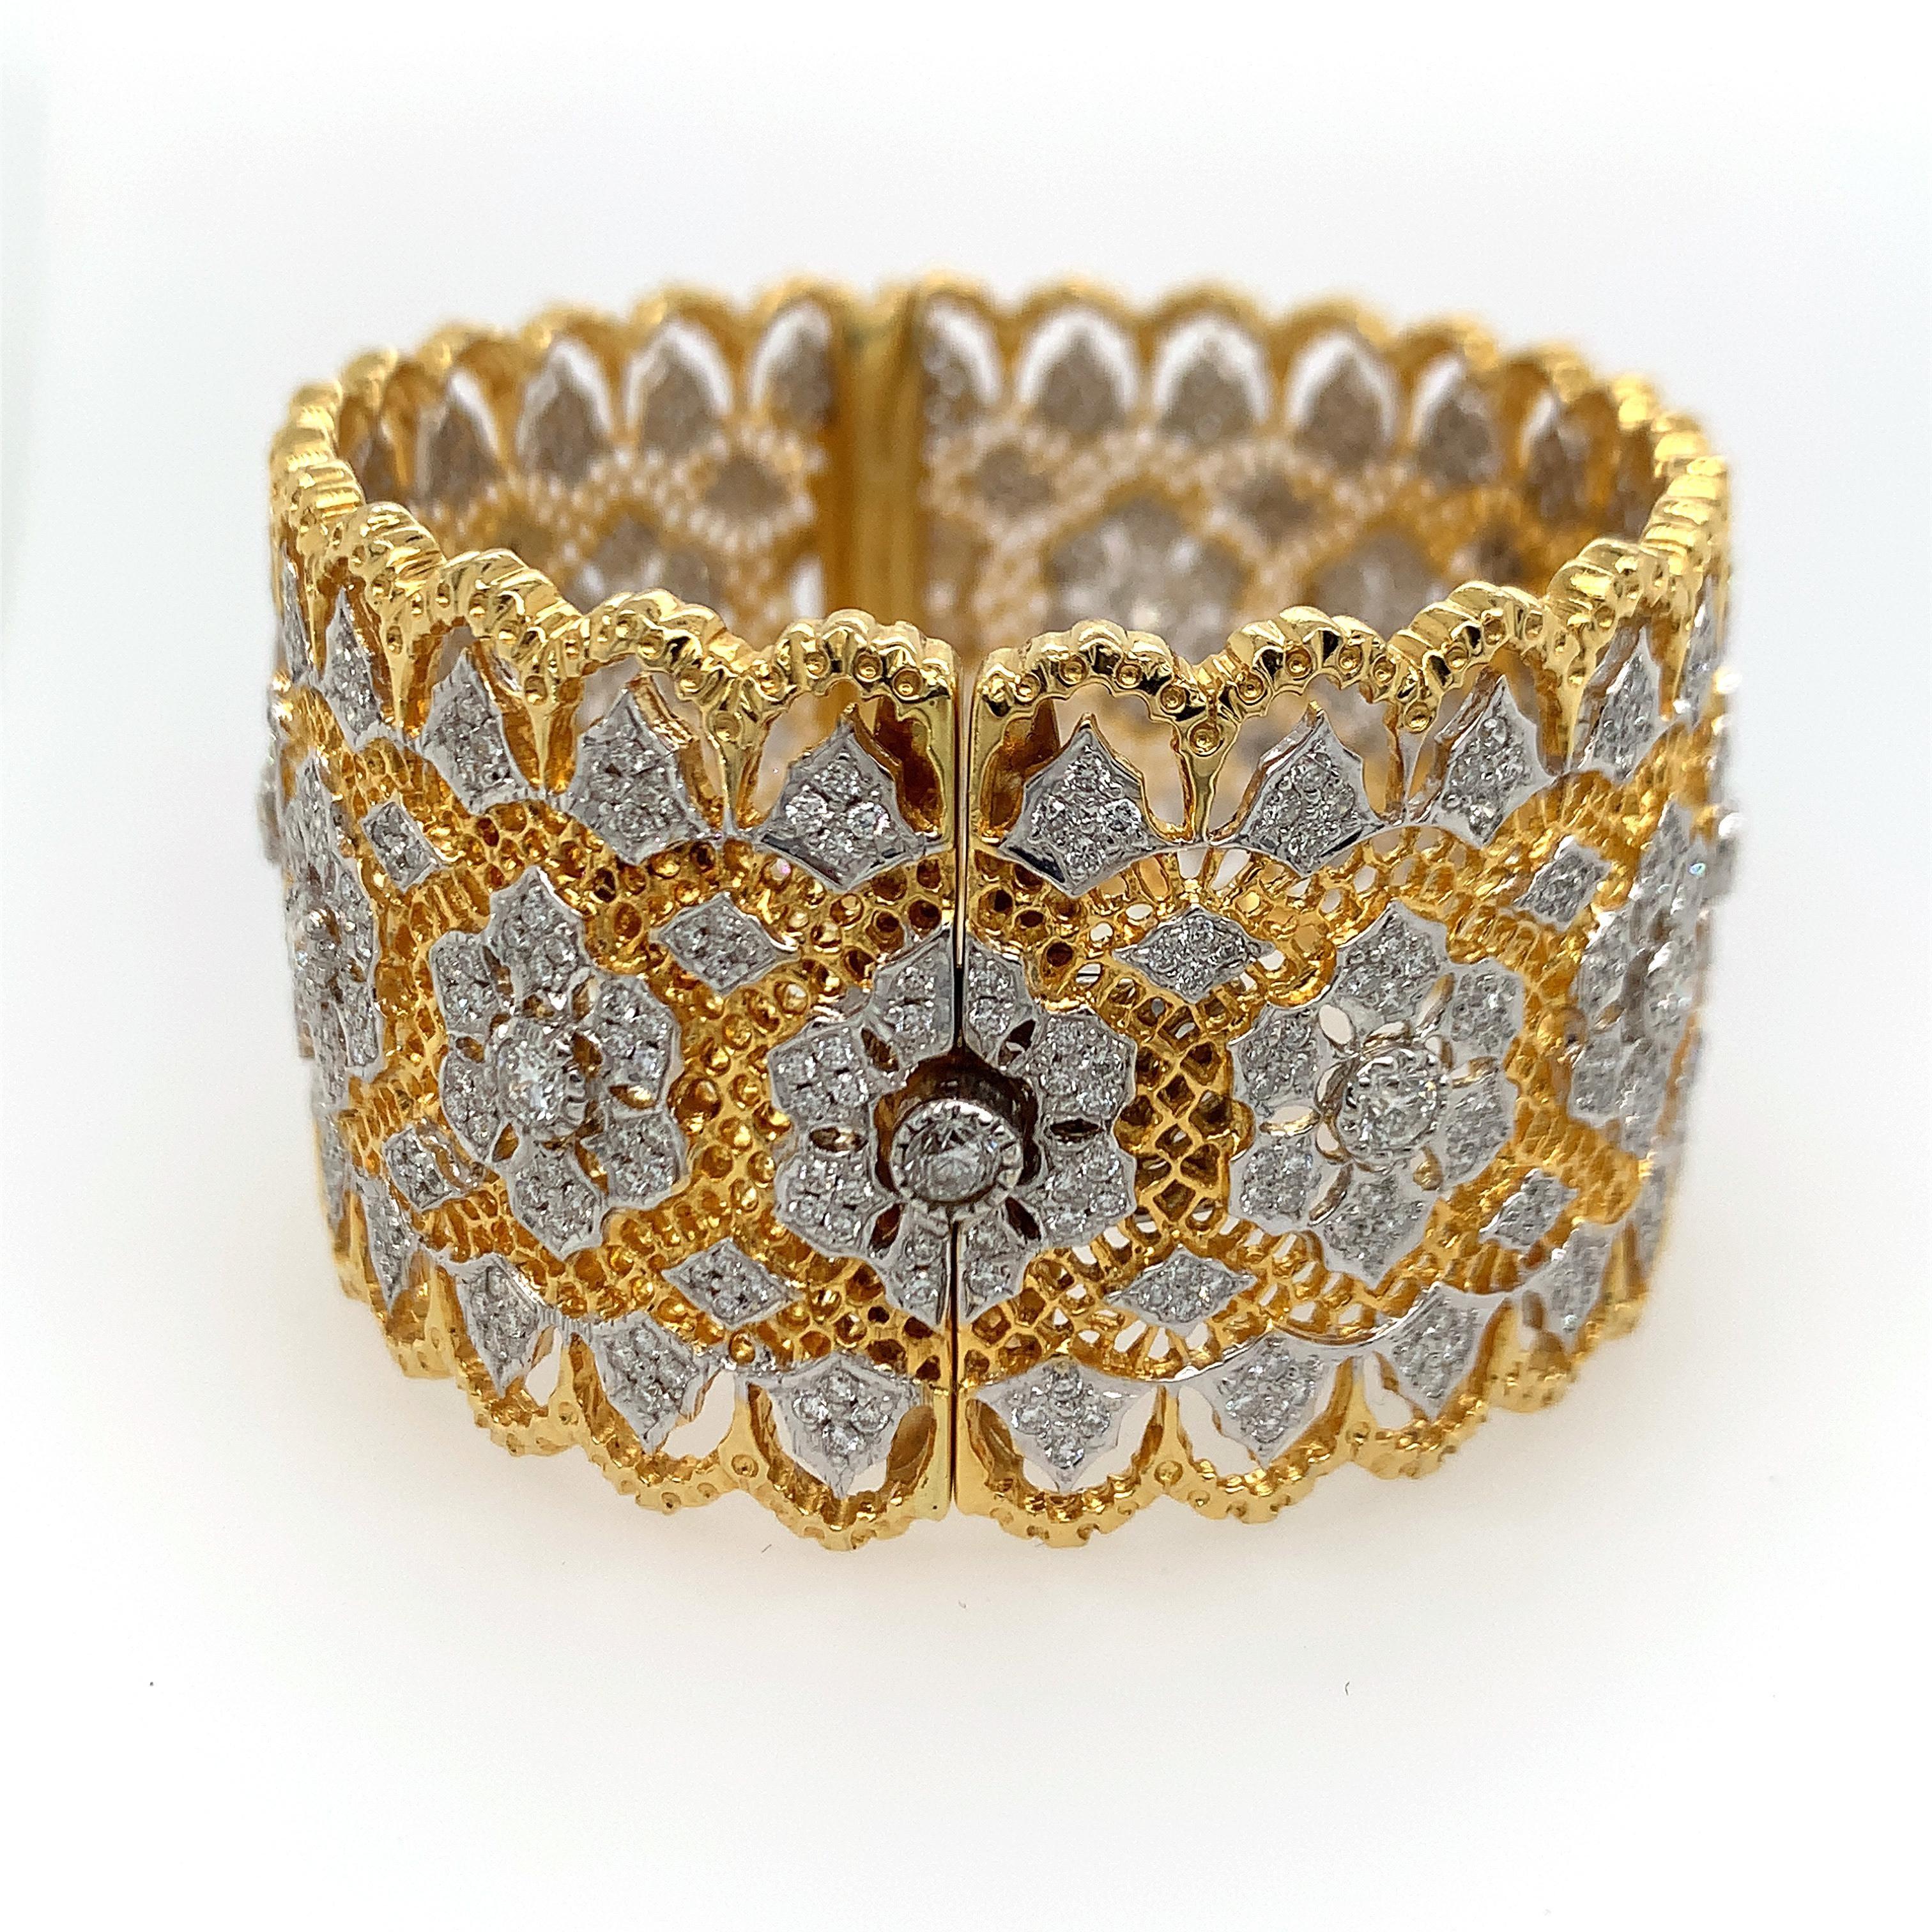 18K two tone gold bangle, stamps K18 D 3.13, RBC diamonds weighing 3.13 ct (inscribed) GH VS, measures 6 1/2 inches inner circumference, 1 1/4 width, weight 52.8 dwt. 